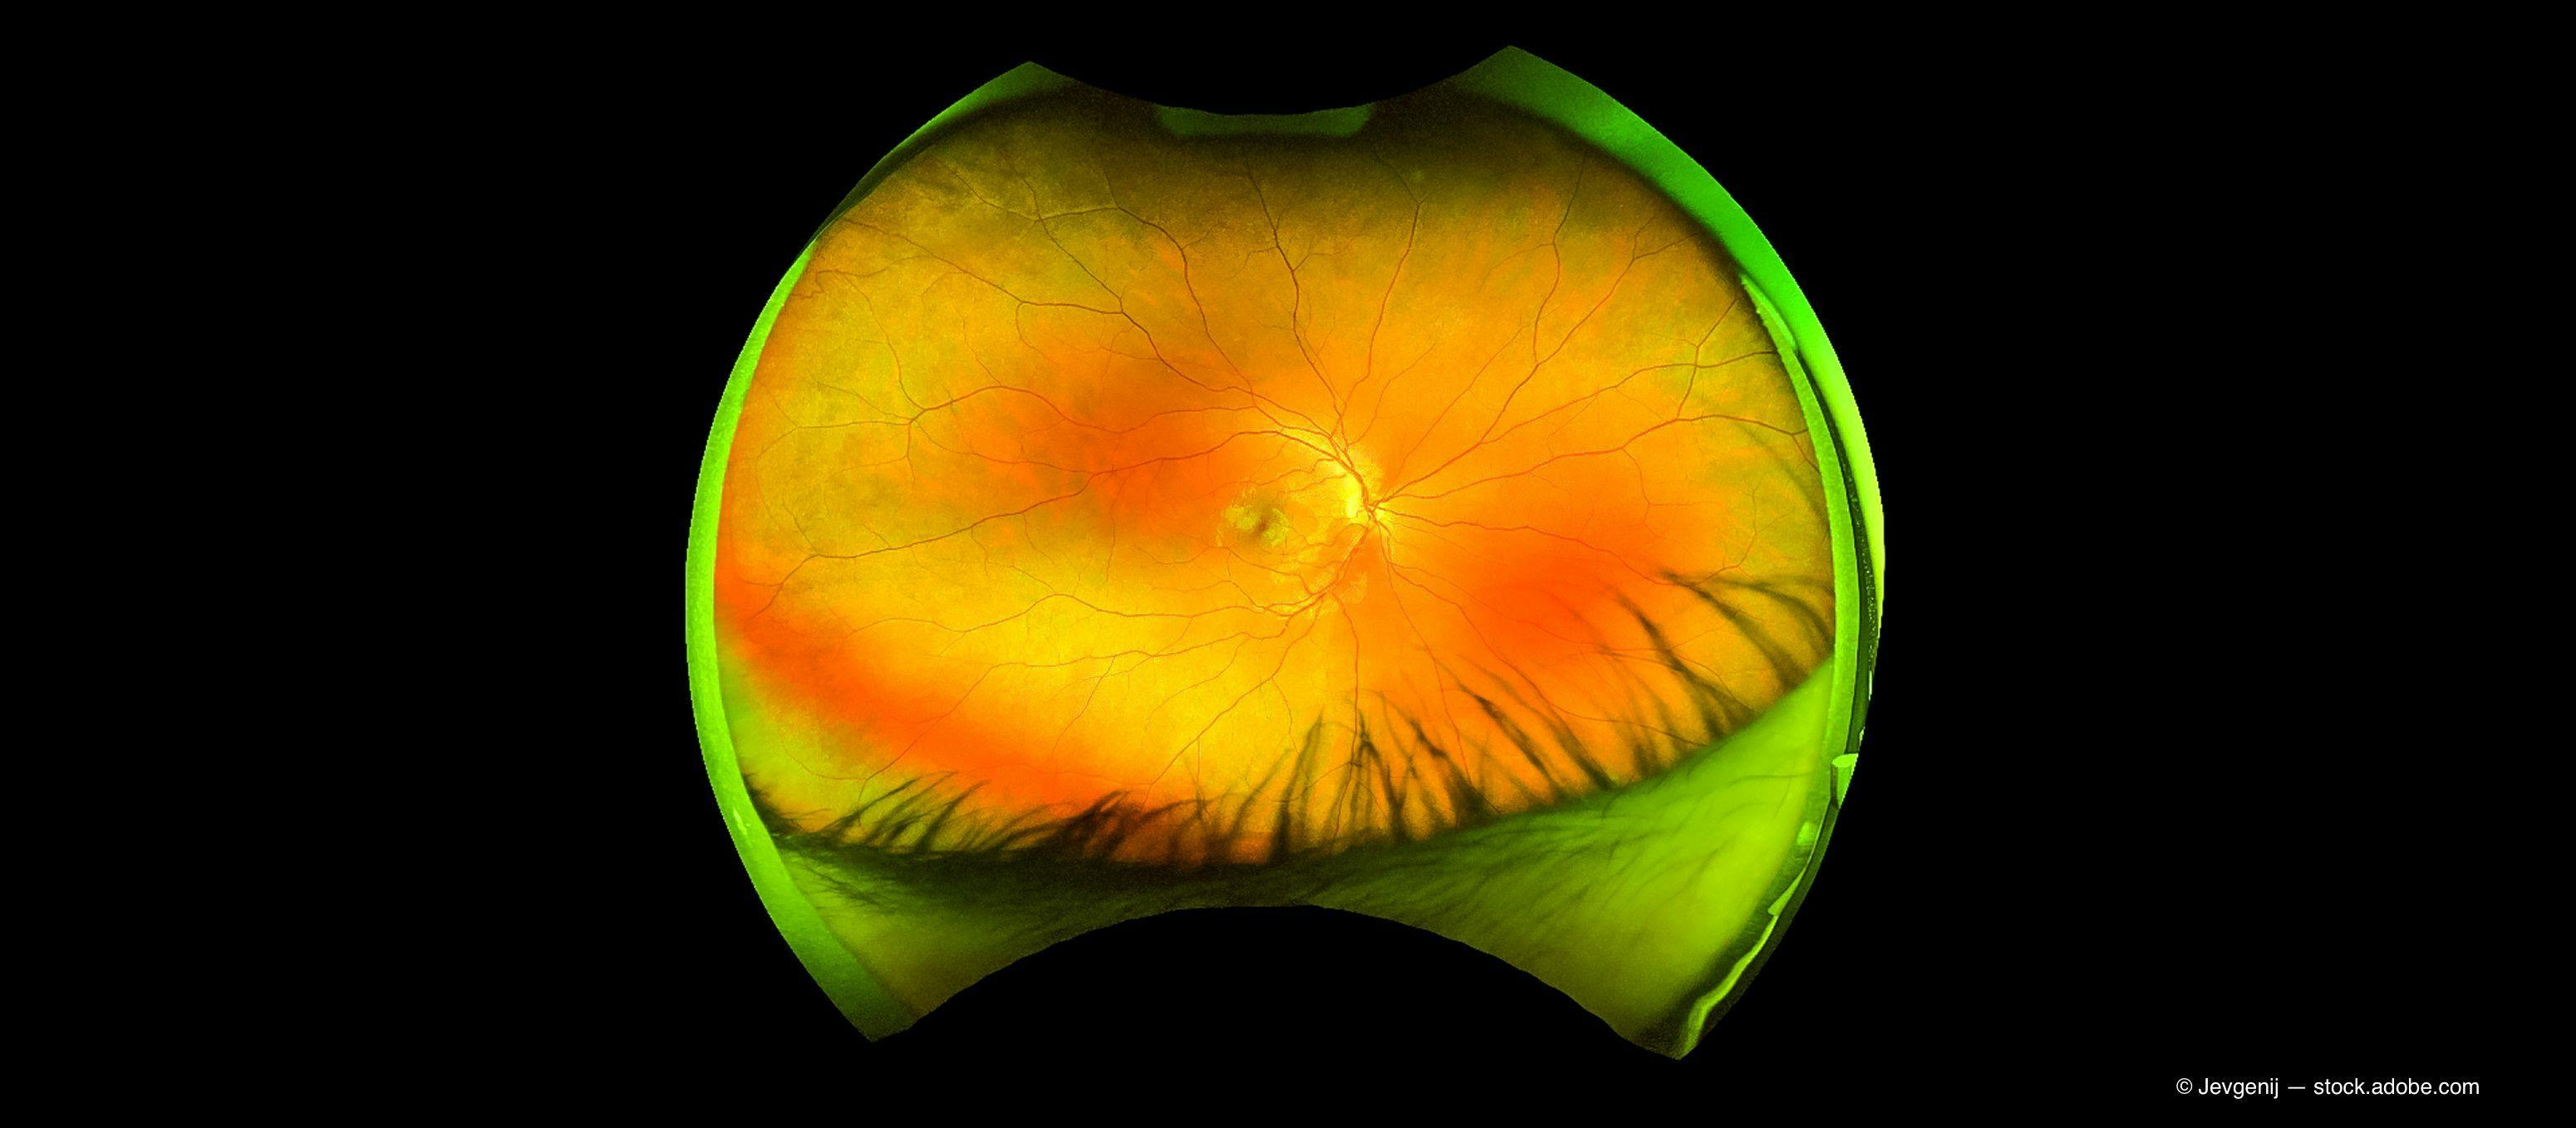 Predicting glaucoma progression: More than meets the eye